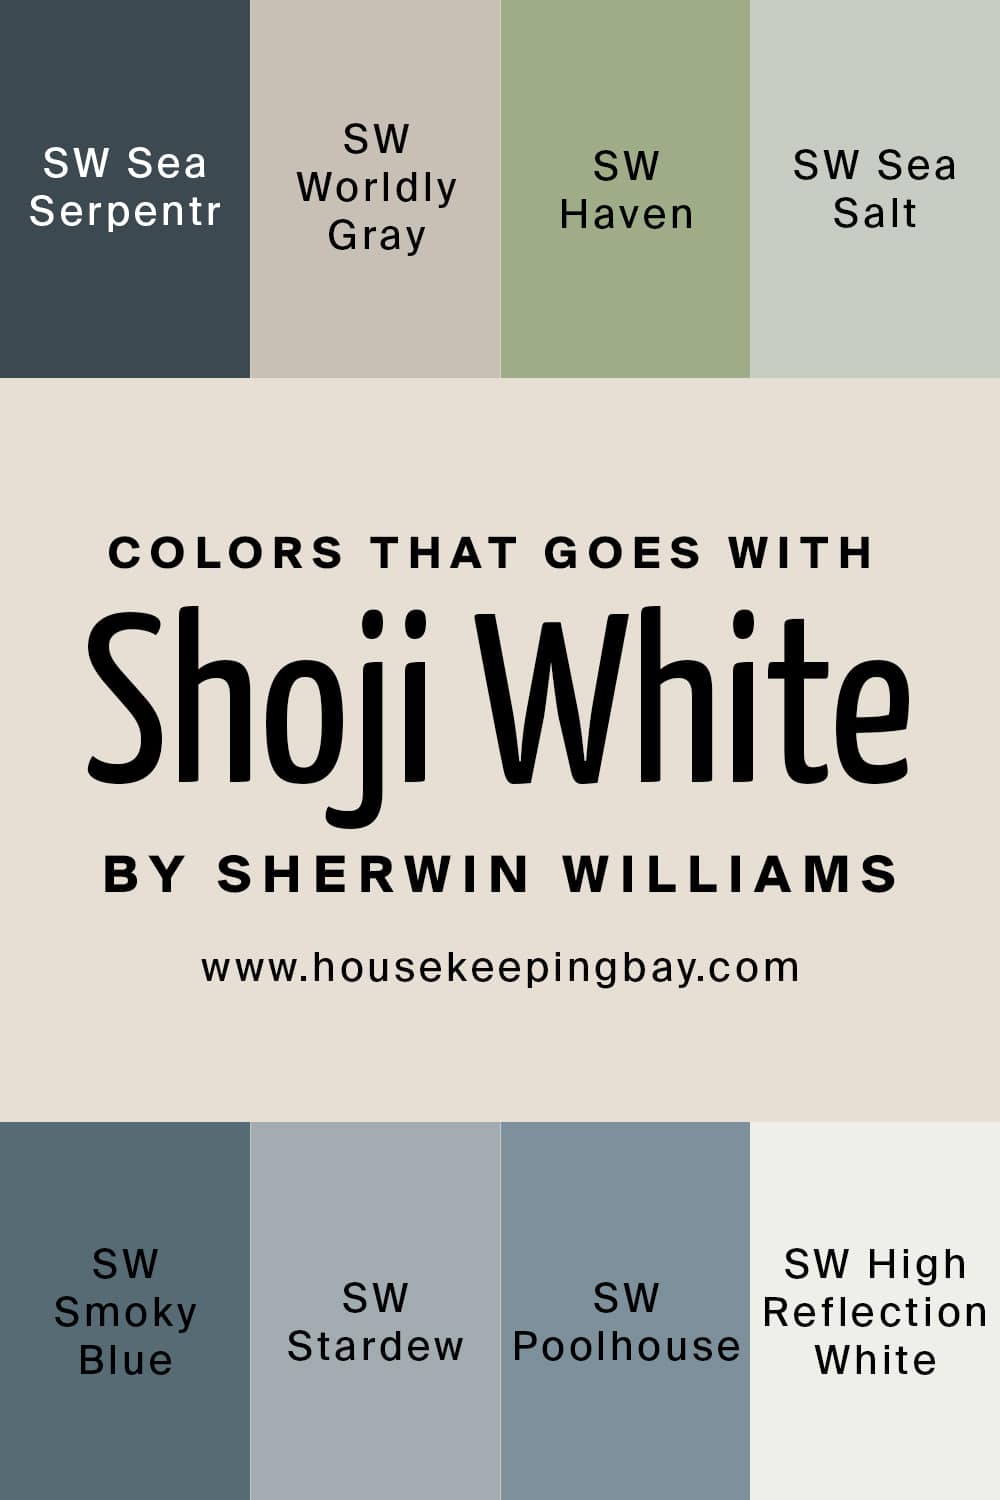 Colors that goes with Shoji White by Sherwin Williams